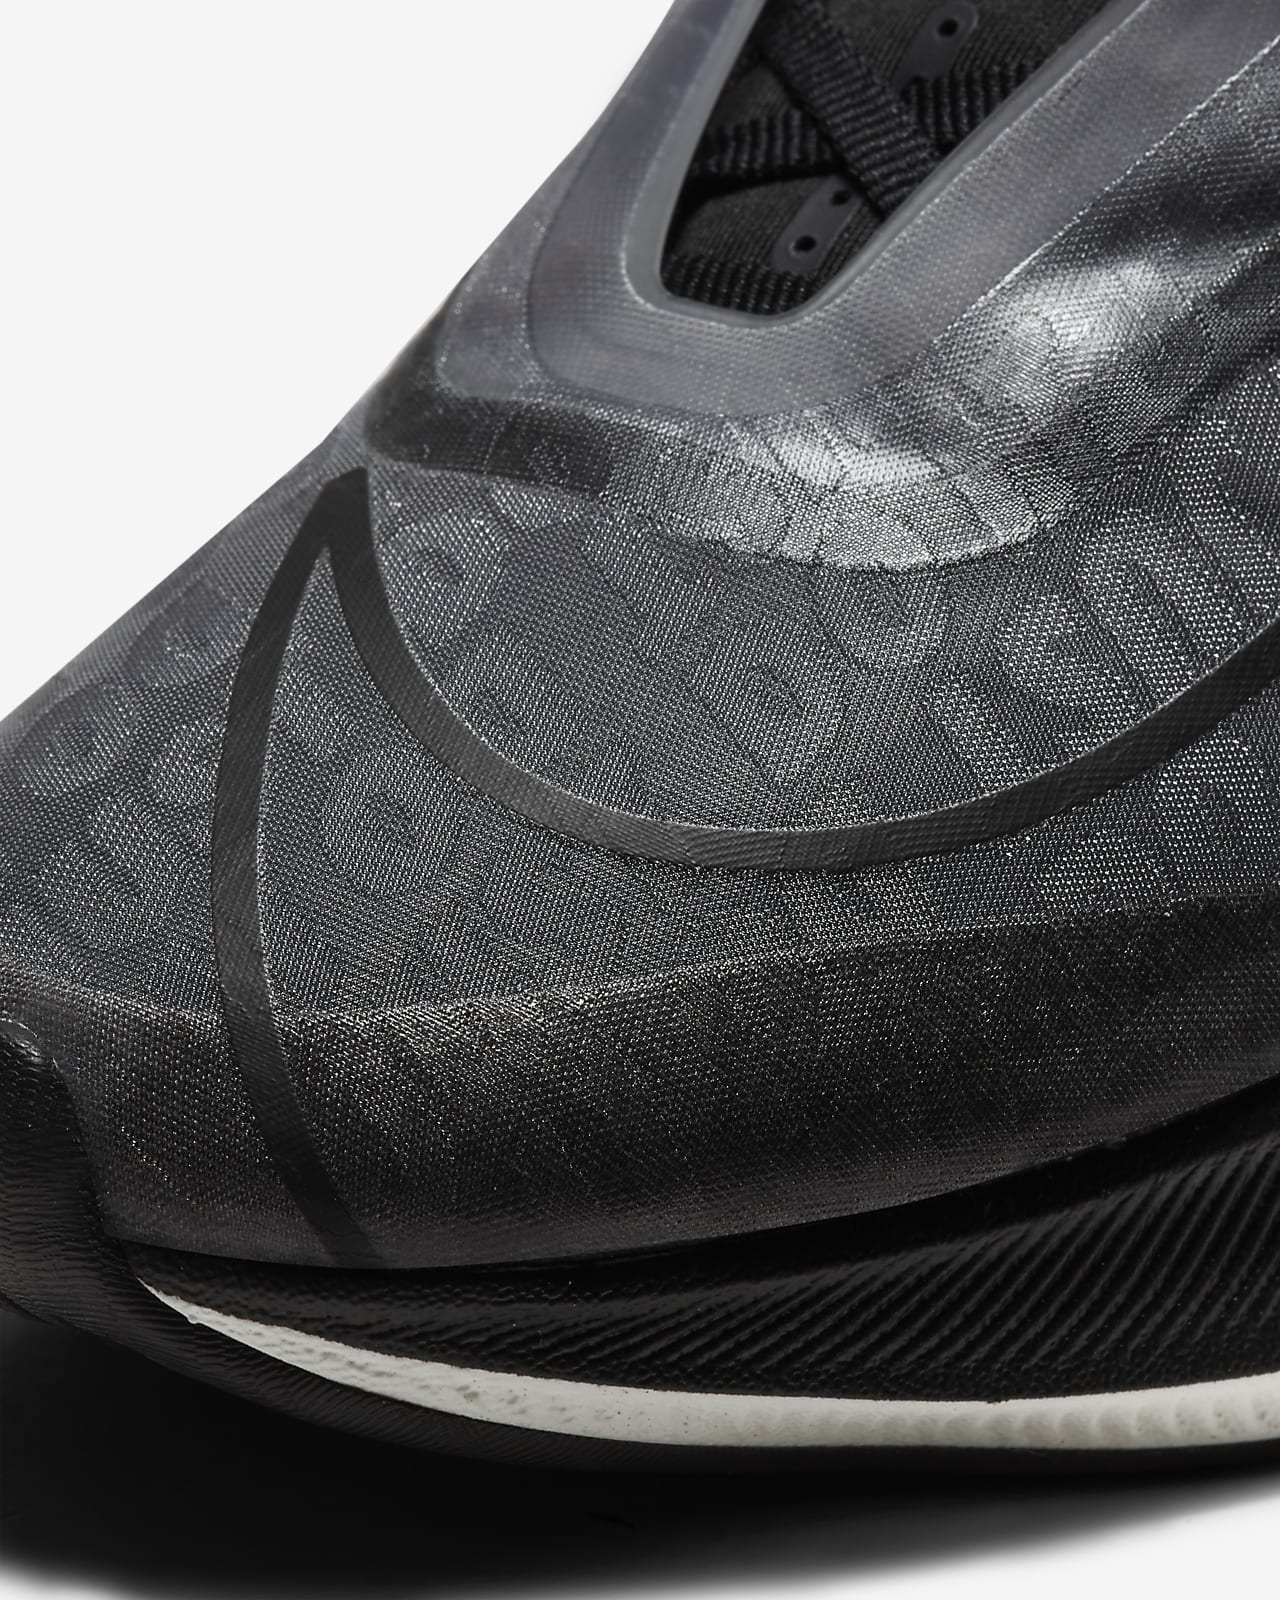 new nike running shoes with carbon fiber